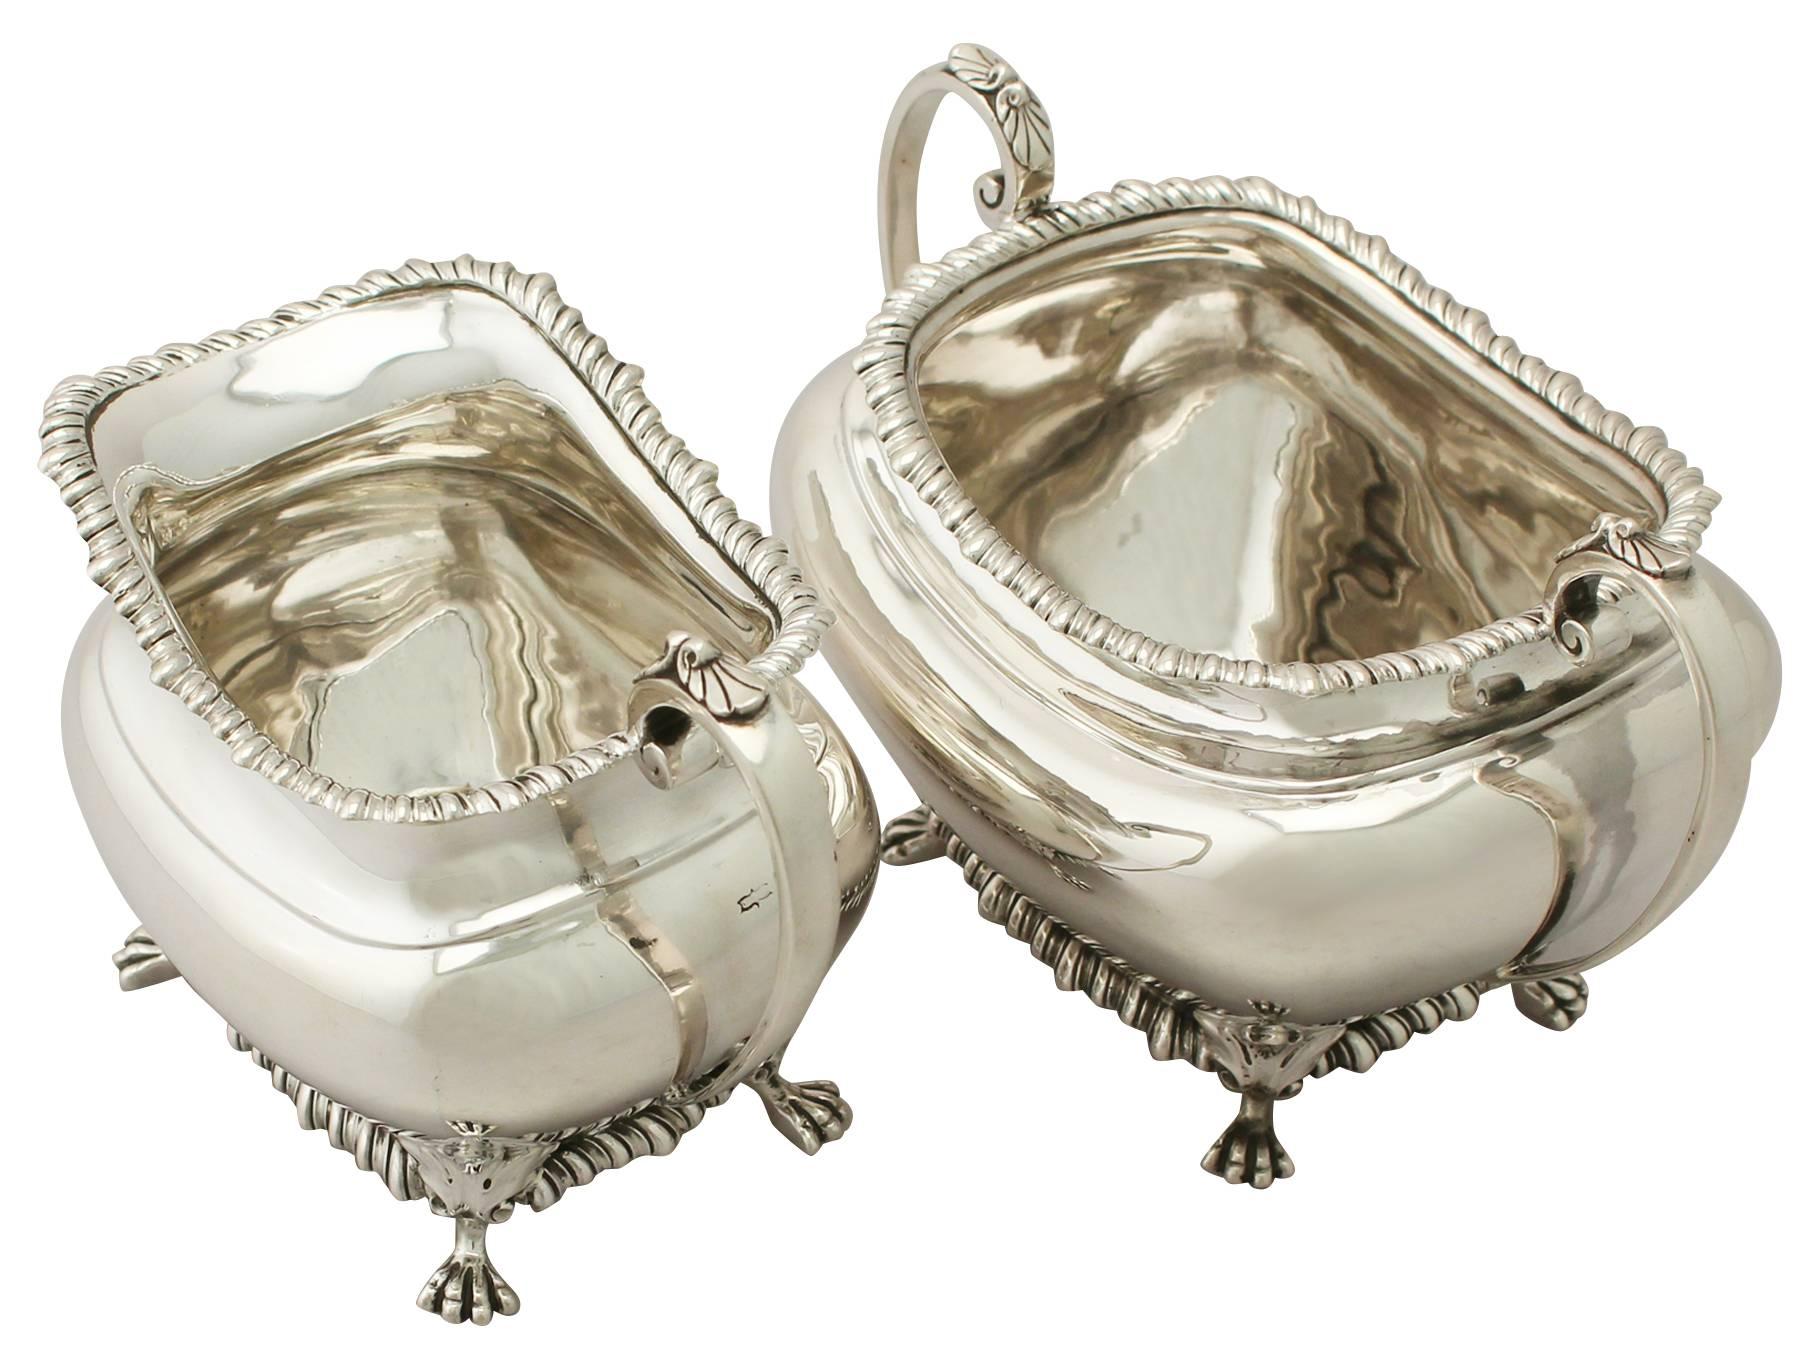 An exceptional, fine and impressive antique Edwardian English sterling silver creamer and sugar set, an addition to our Edwardian silver teaware collection.

This exceptional antique Edwardian English sterling silver cream jug and sugar set have a